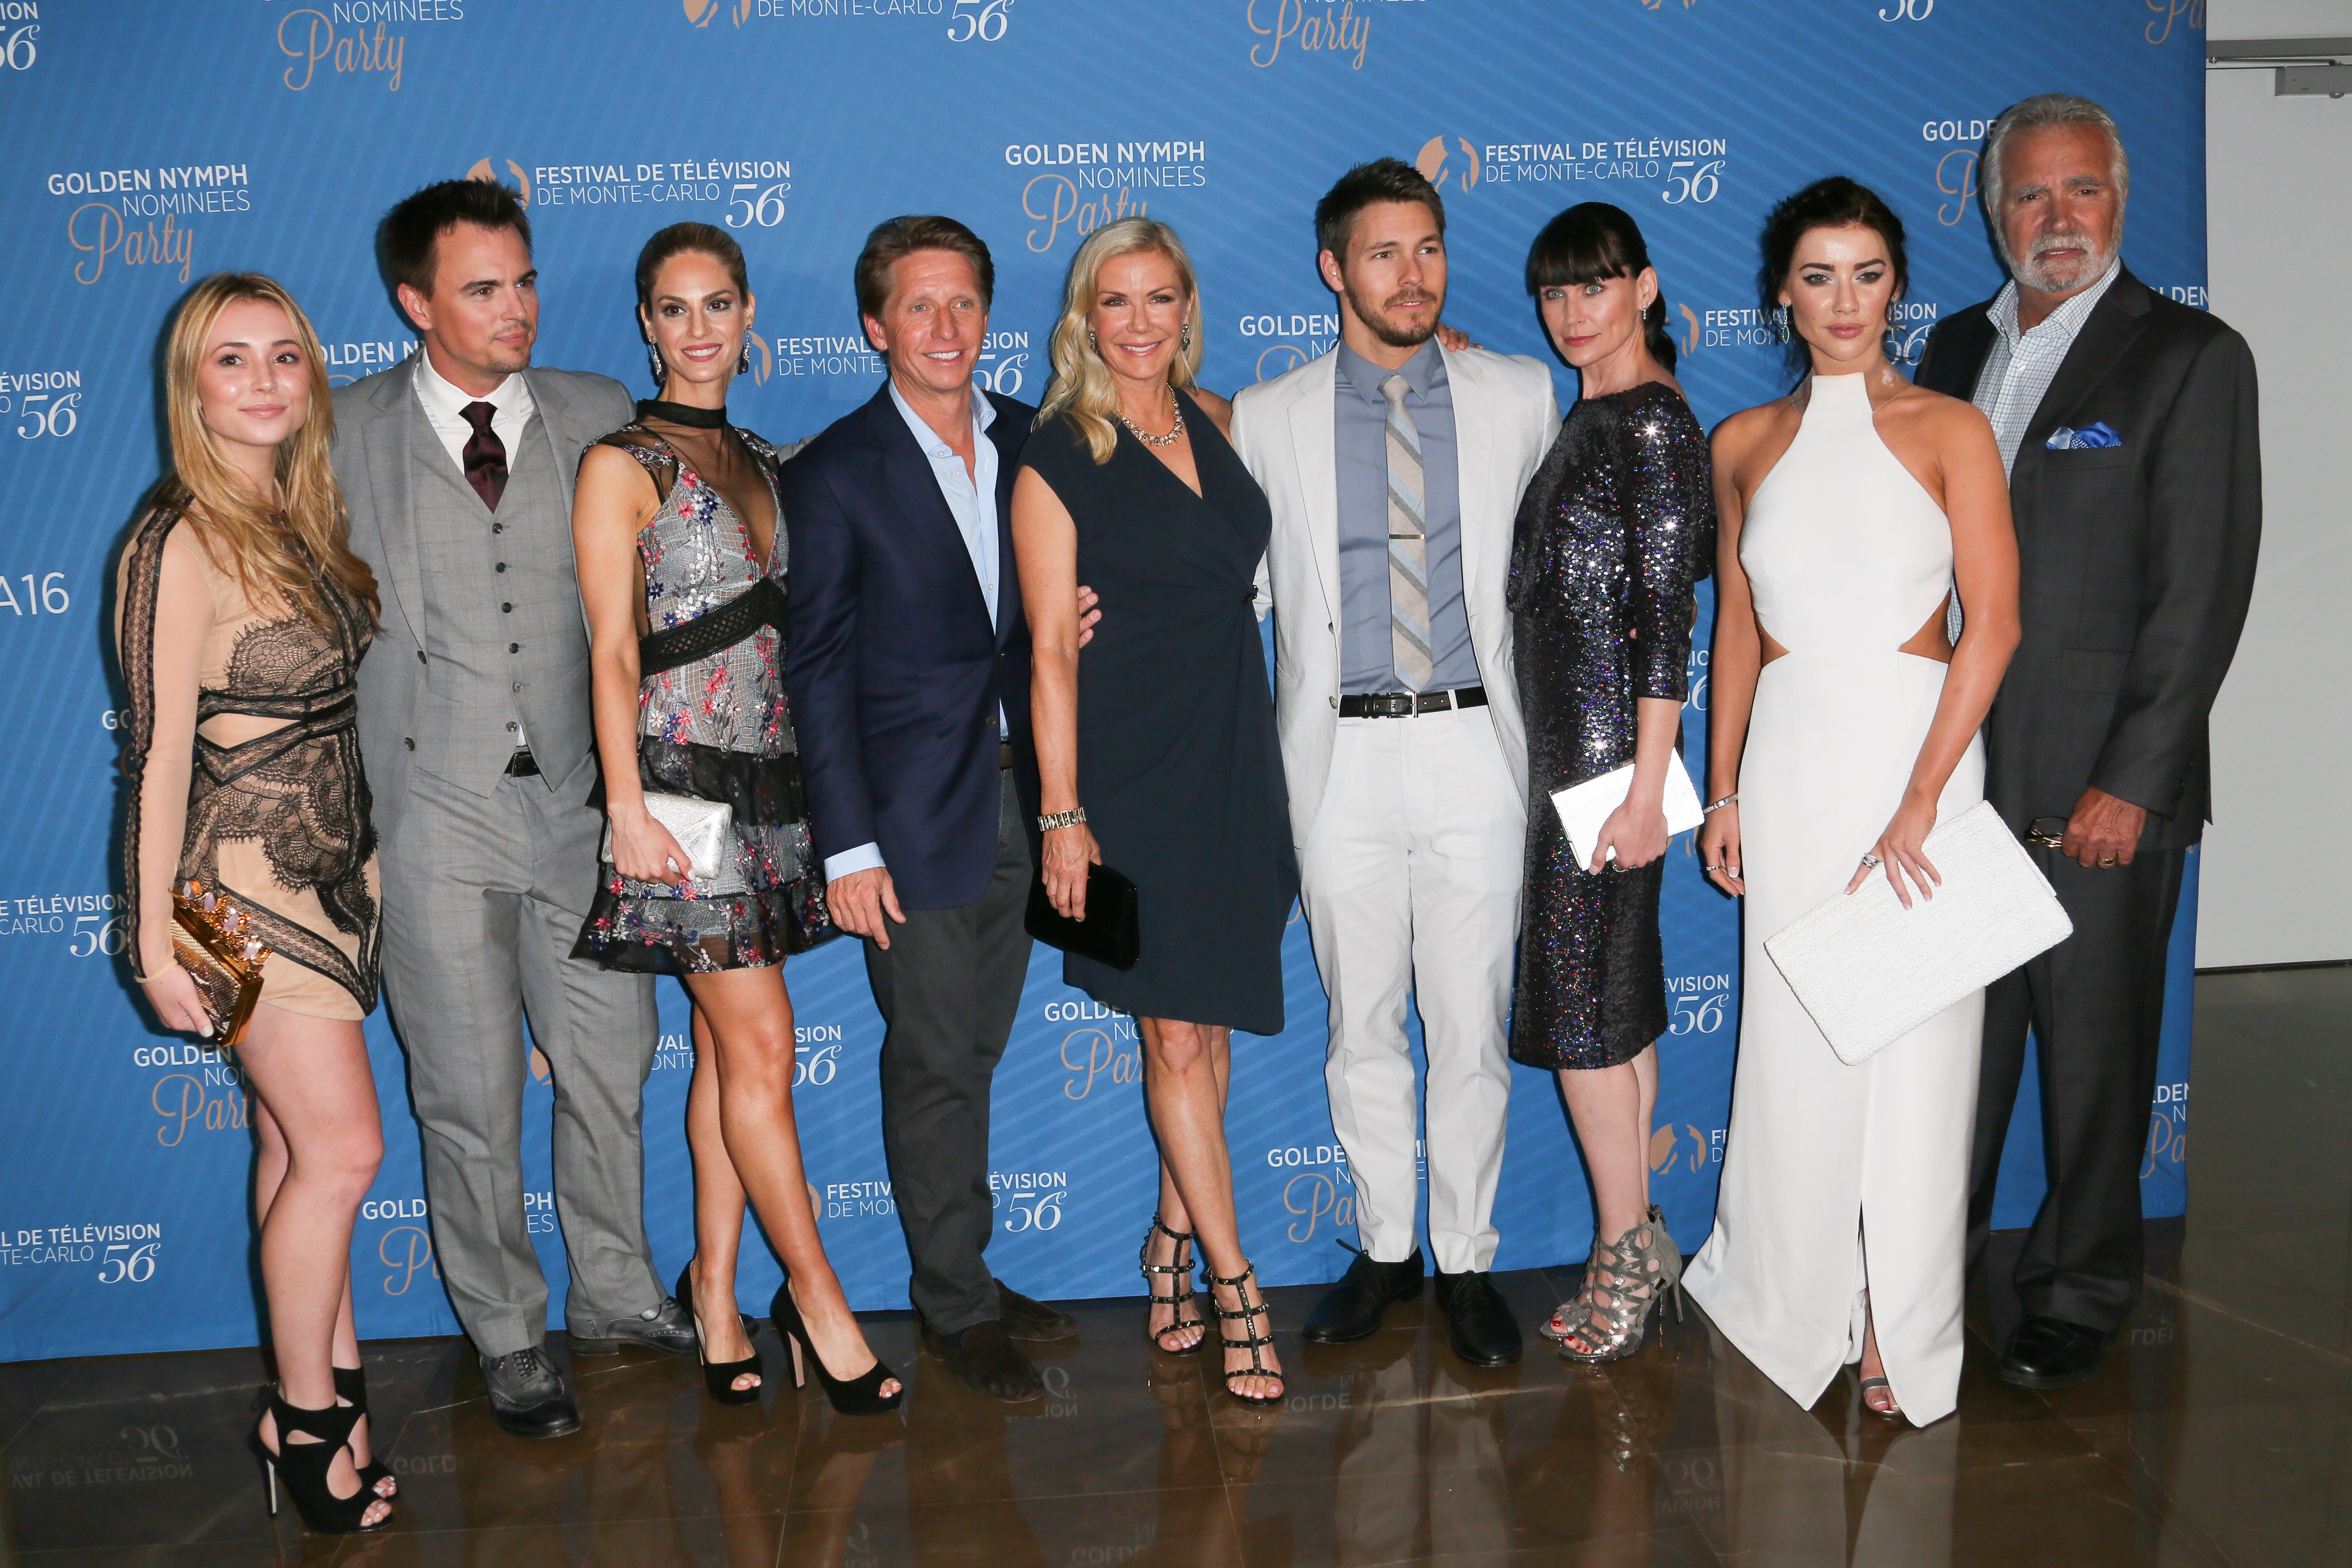 'The Bold and the Beautiful' cast and executive producer Brad Bell pose for a photo at the Monte Carlo TV Festival.